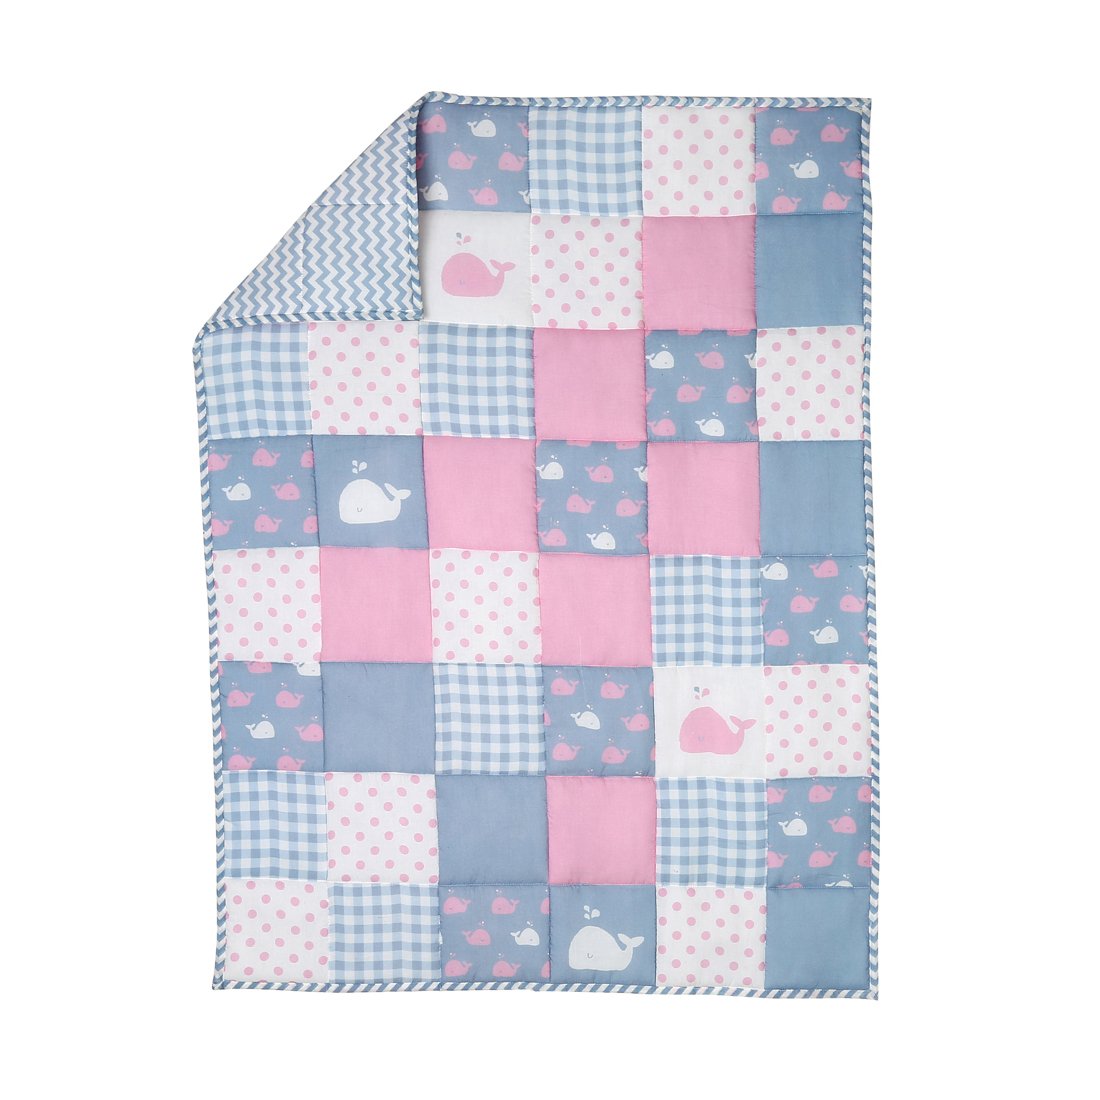 Pink Soft Baby Quilt for New Born Girls and Boys - Crib Baby Blanket Cover Cotton Cute Whale Pattern Toddler Comforter